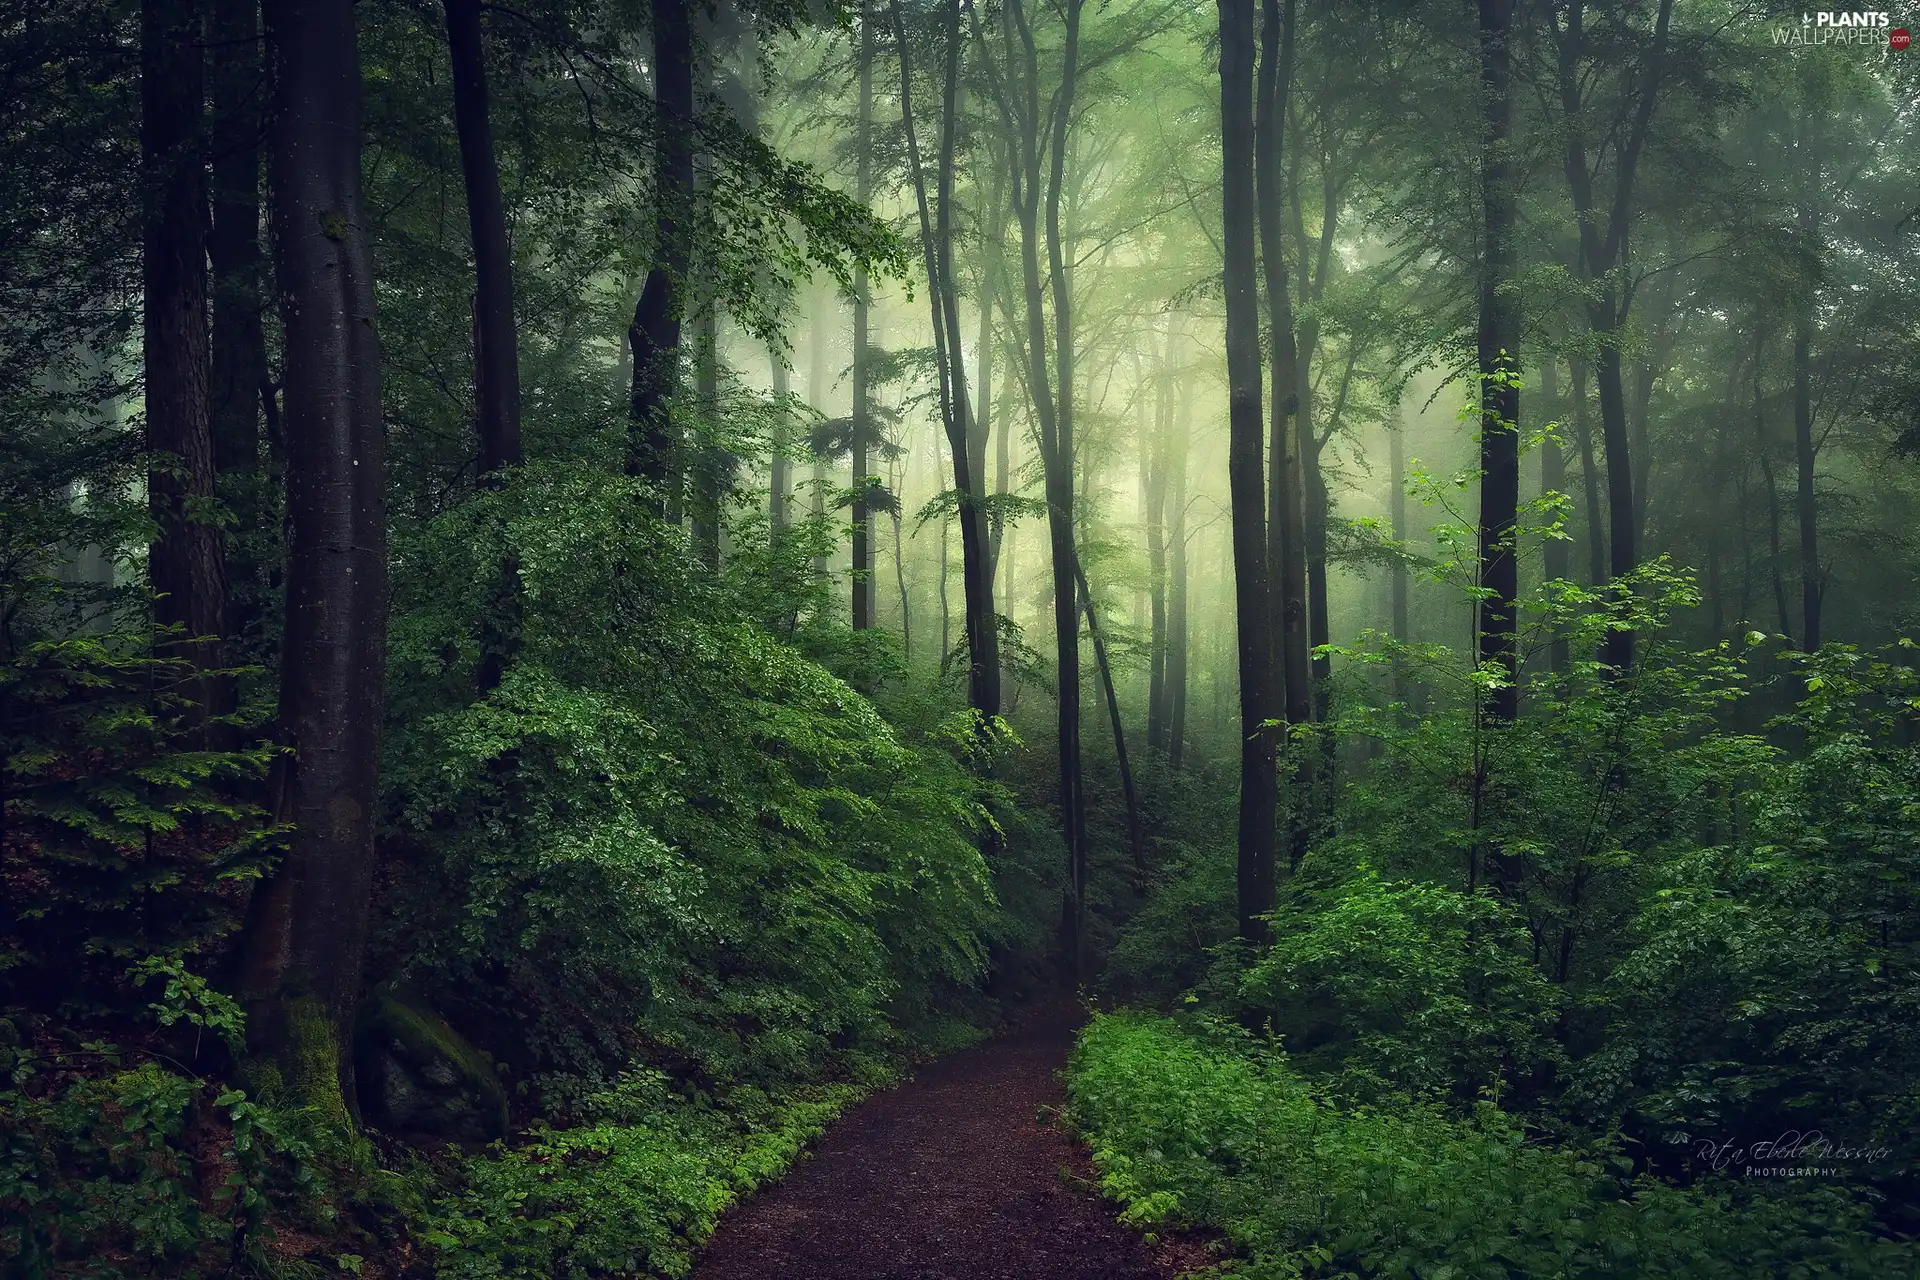 viewes, green ones, Fog, trees, forest, Bush, Path